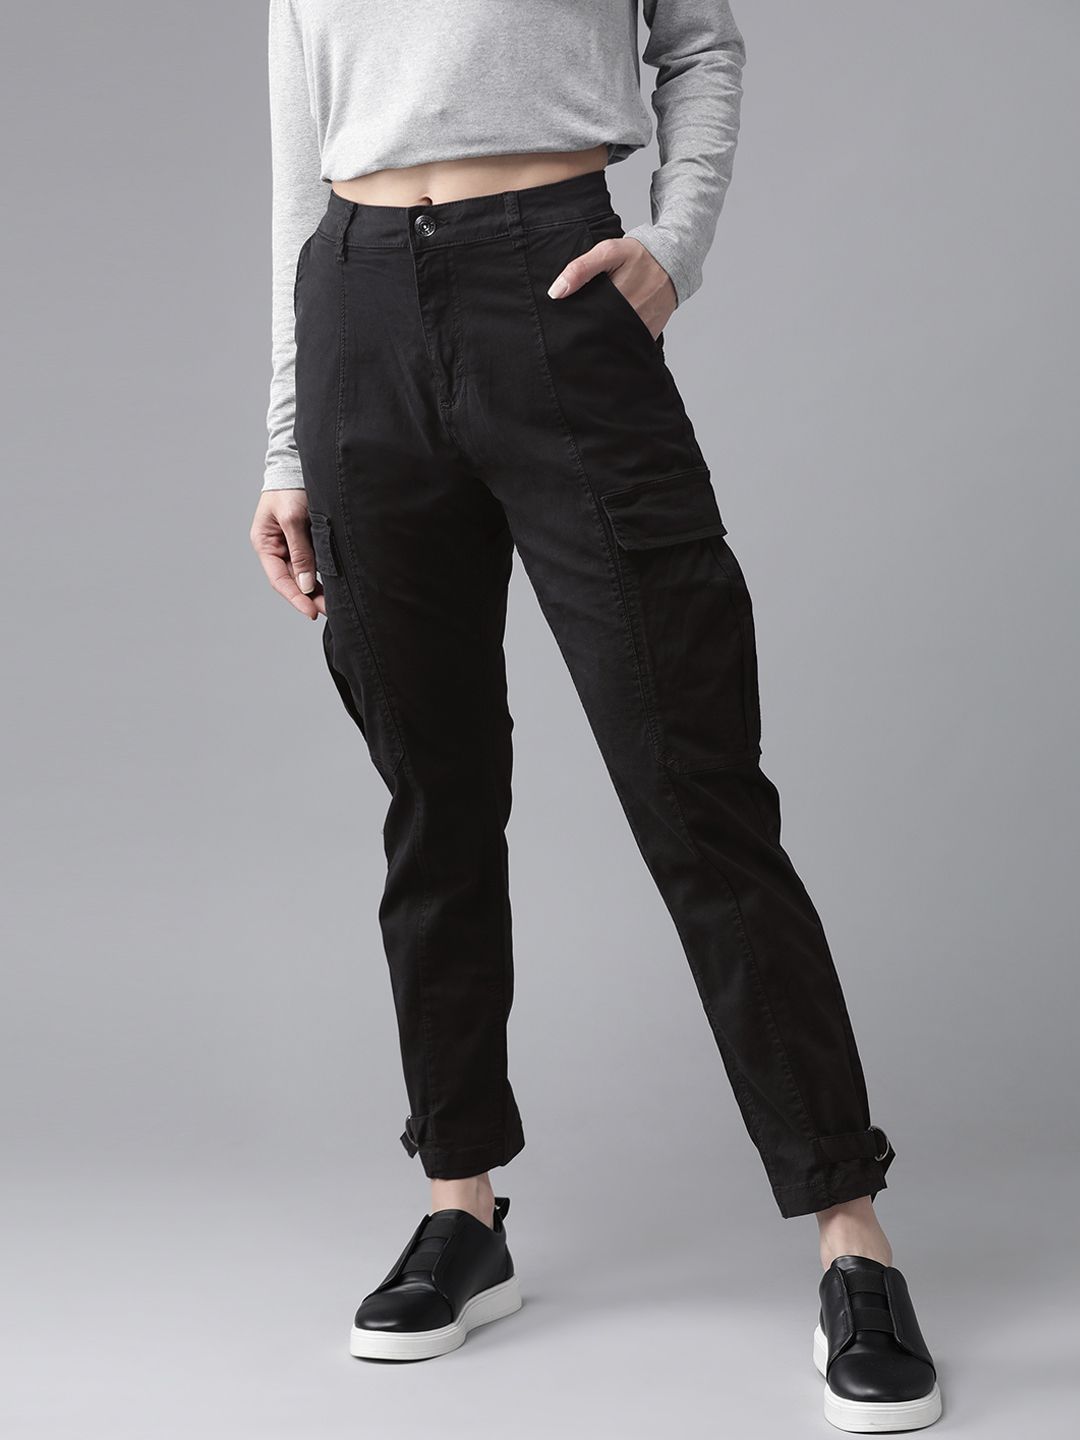 The Roadster Lifestyle Co Women Black Regular Fit Solid Cargos with D-Ring at Hem Price in India